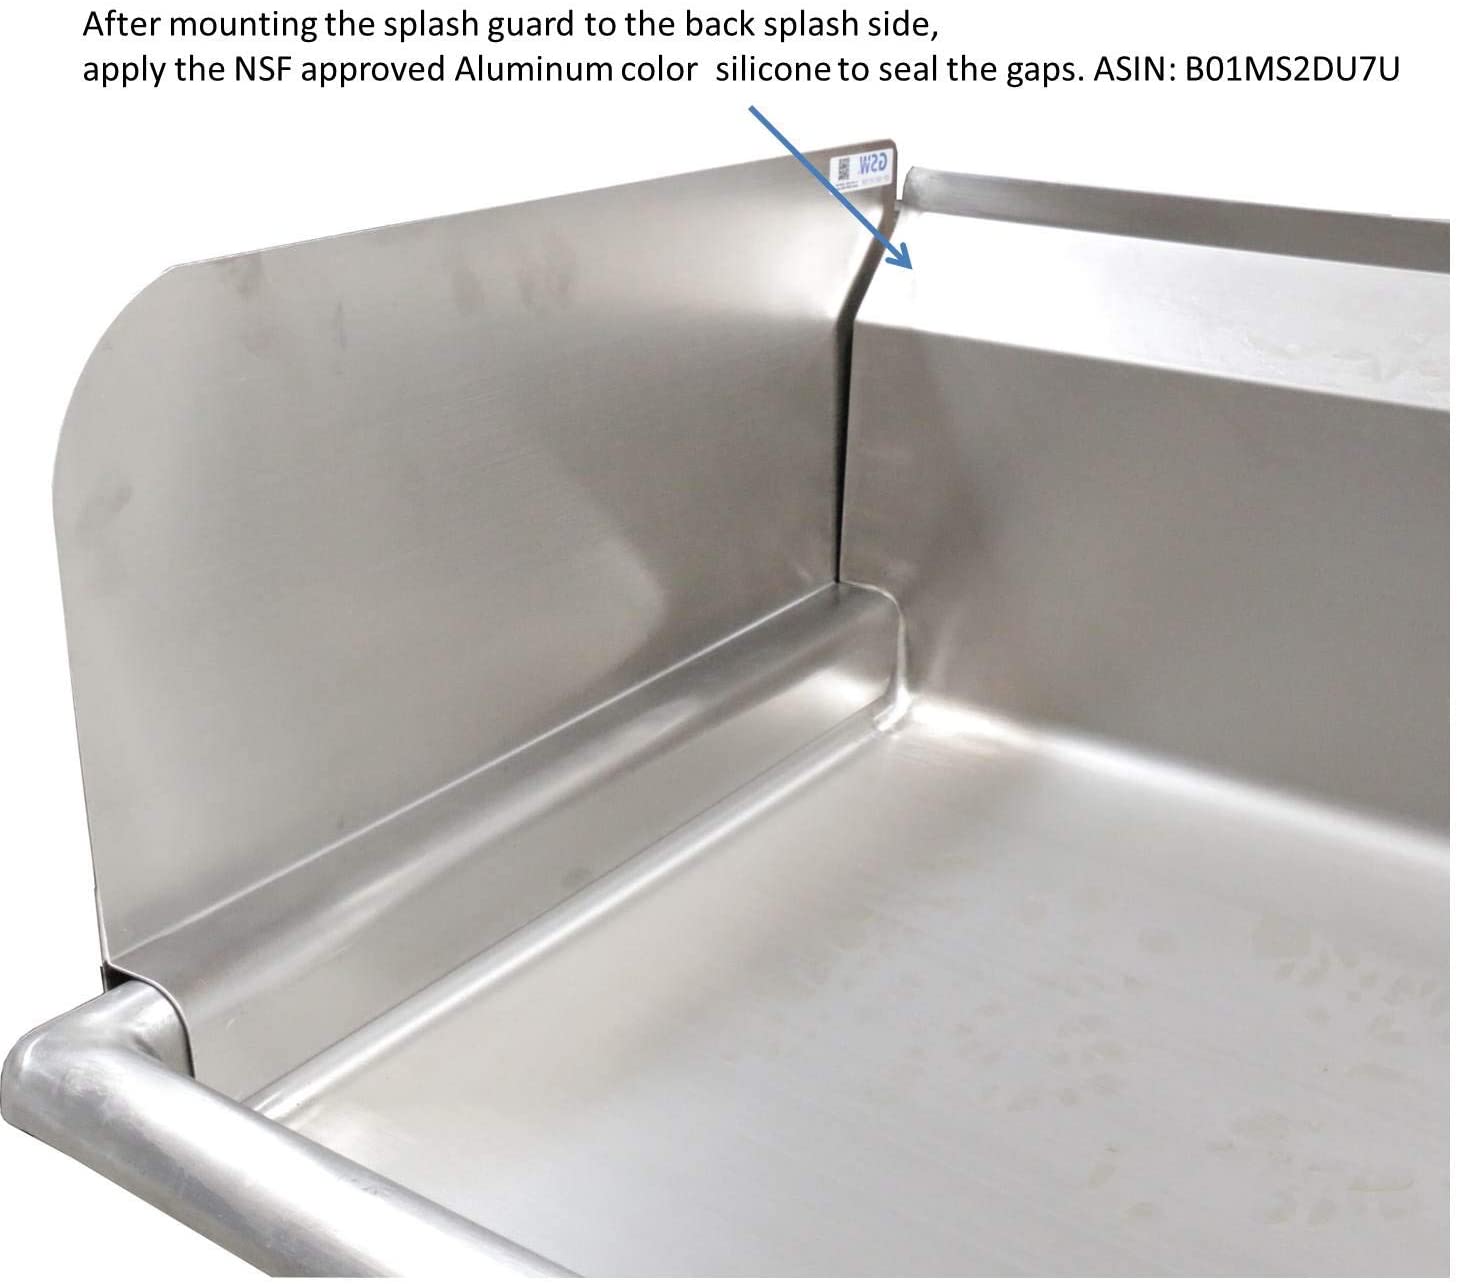 GSW SP-SH1810L Stainless Steel Insert Type Splash Guard for Compartment Sinks (22" L x 11" H Left)